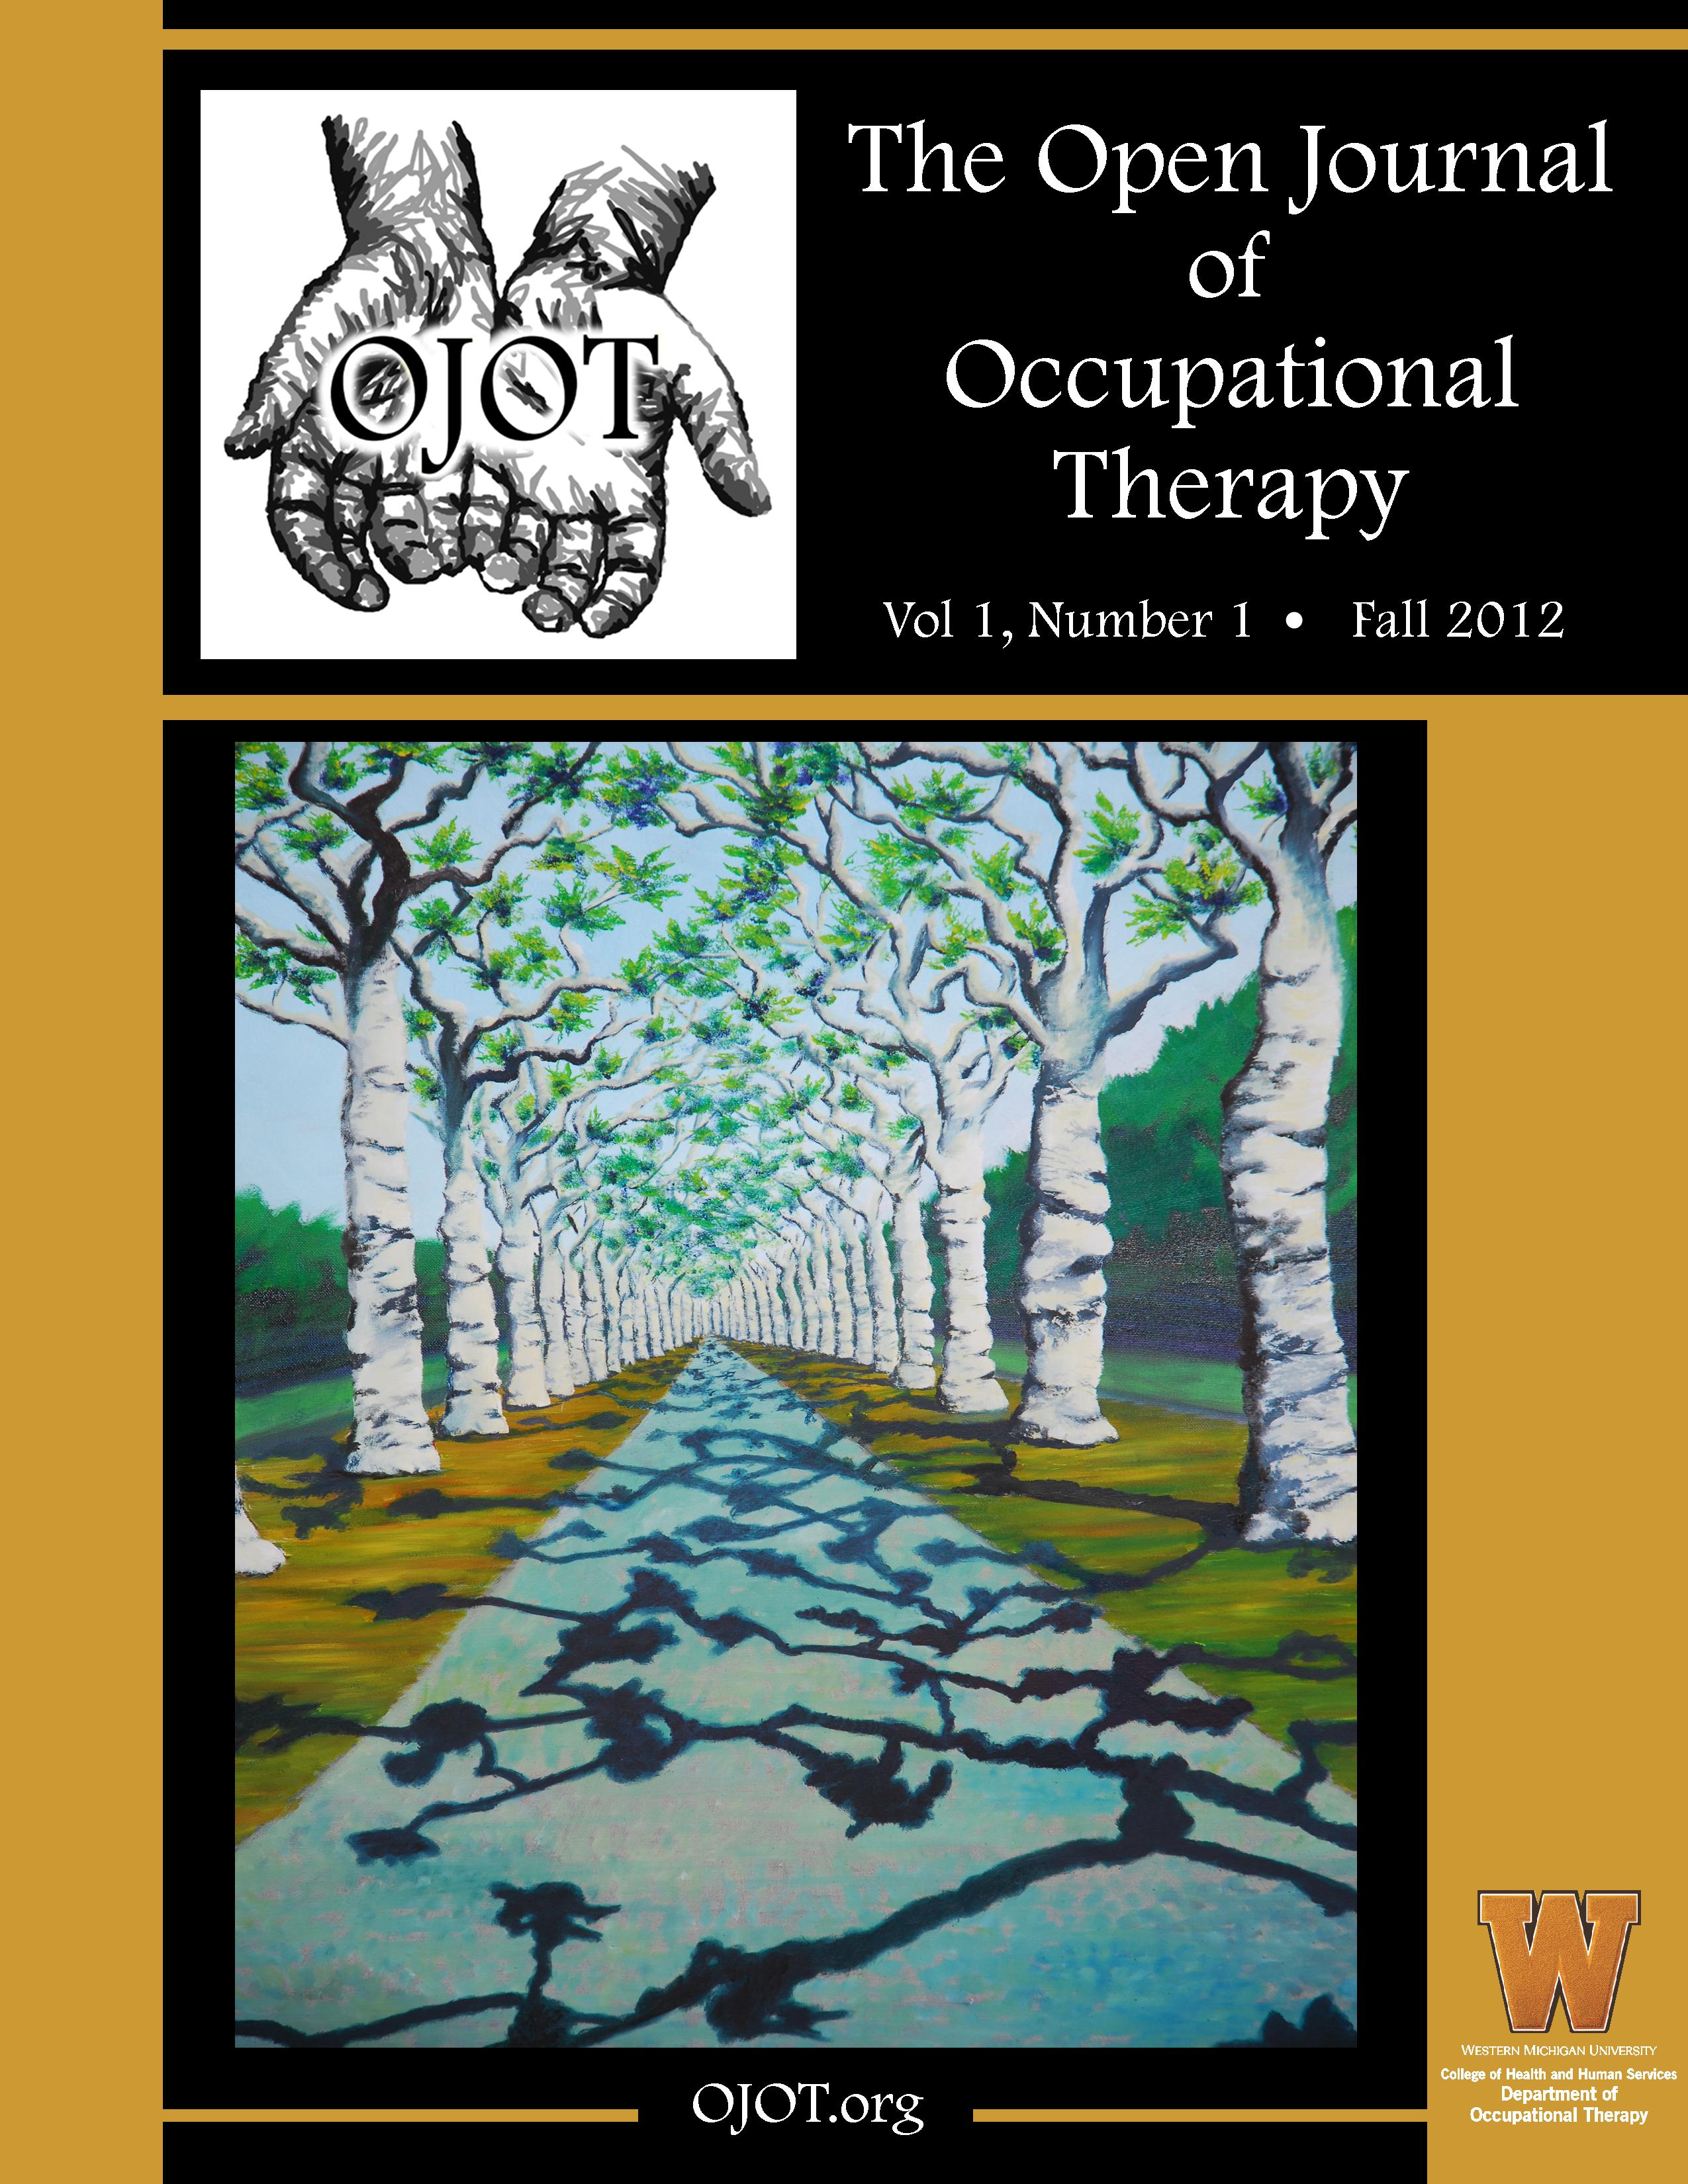 The Open Journal of Occupational Therapy